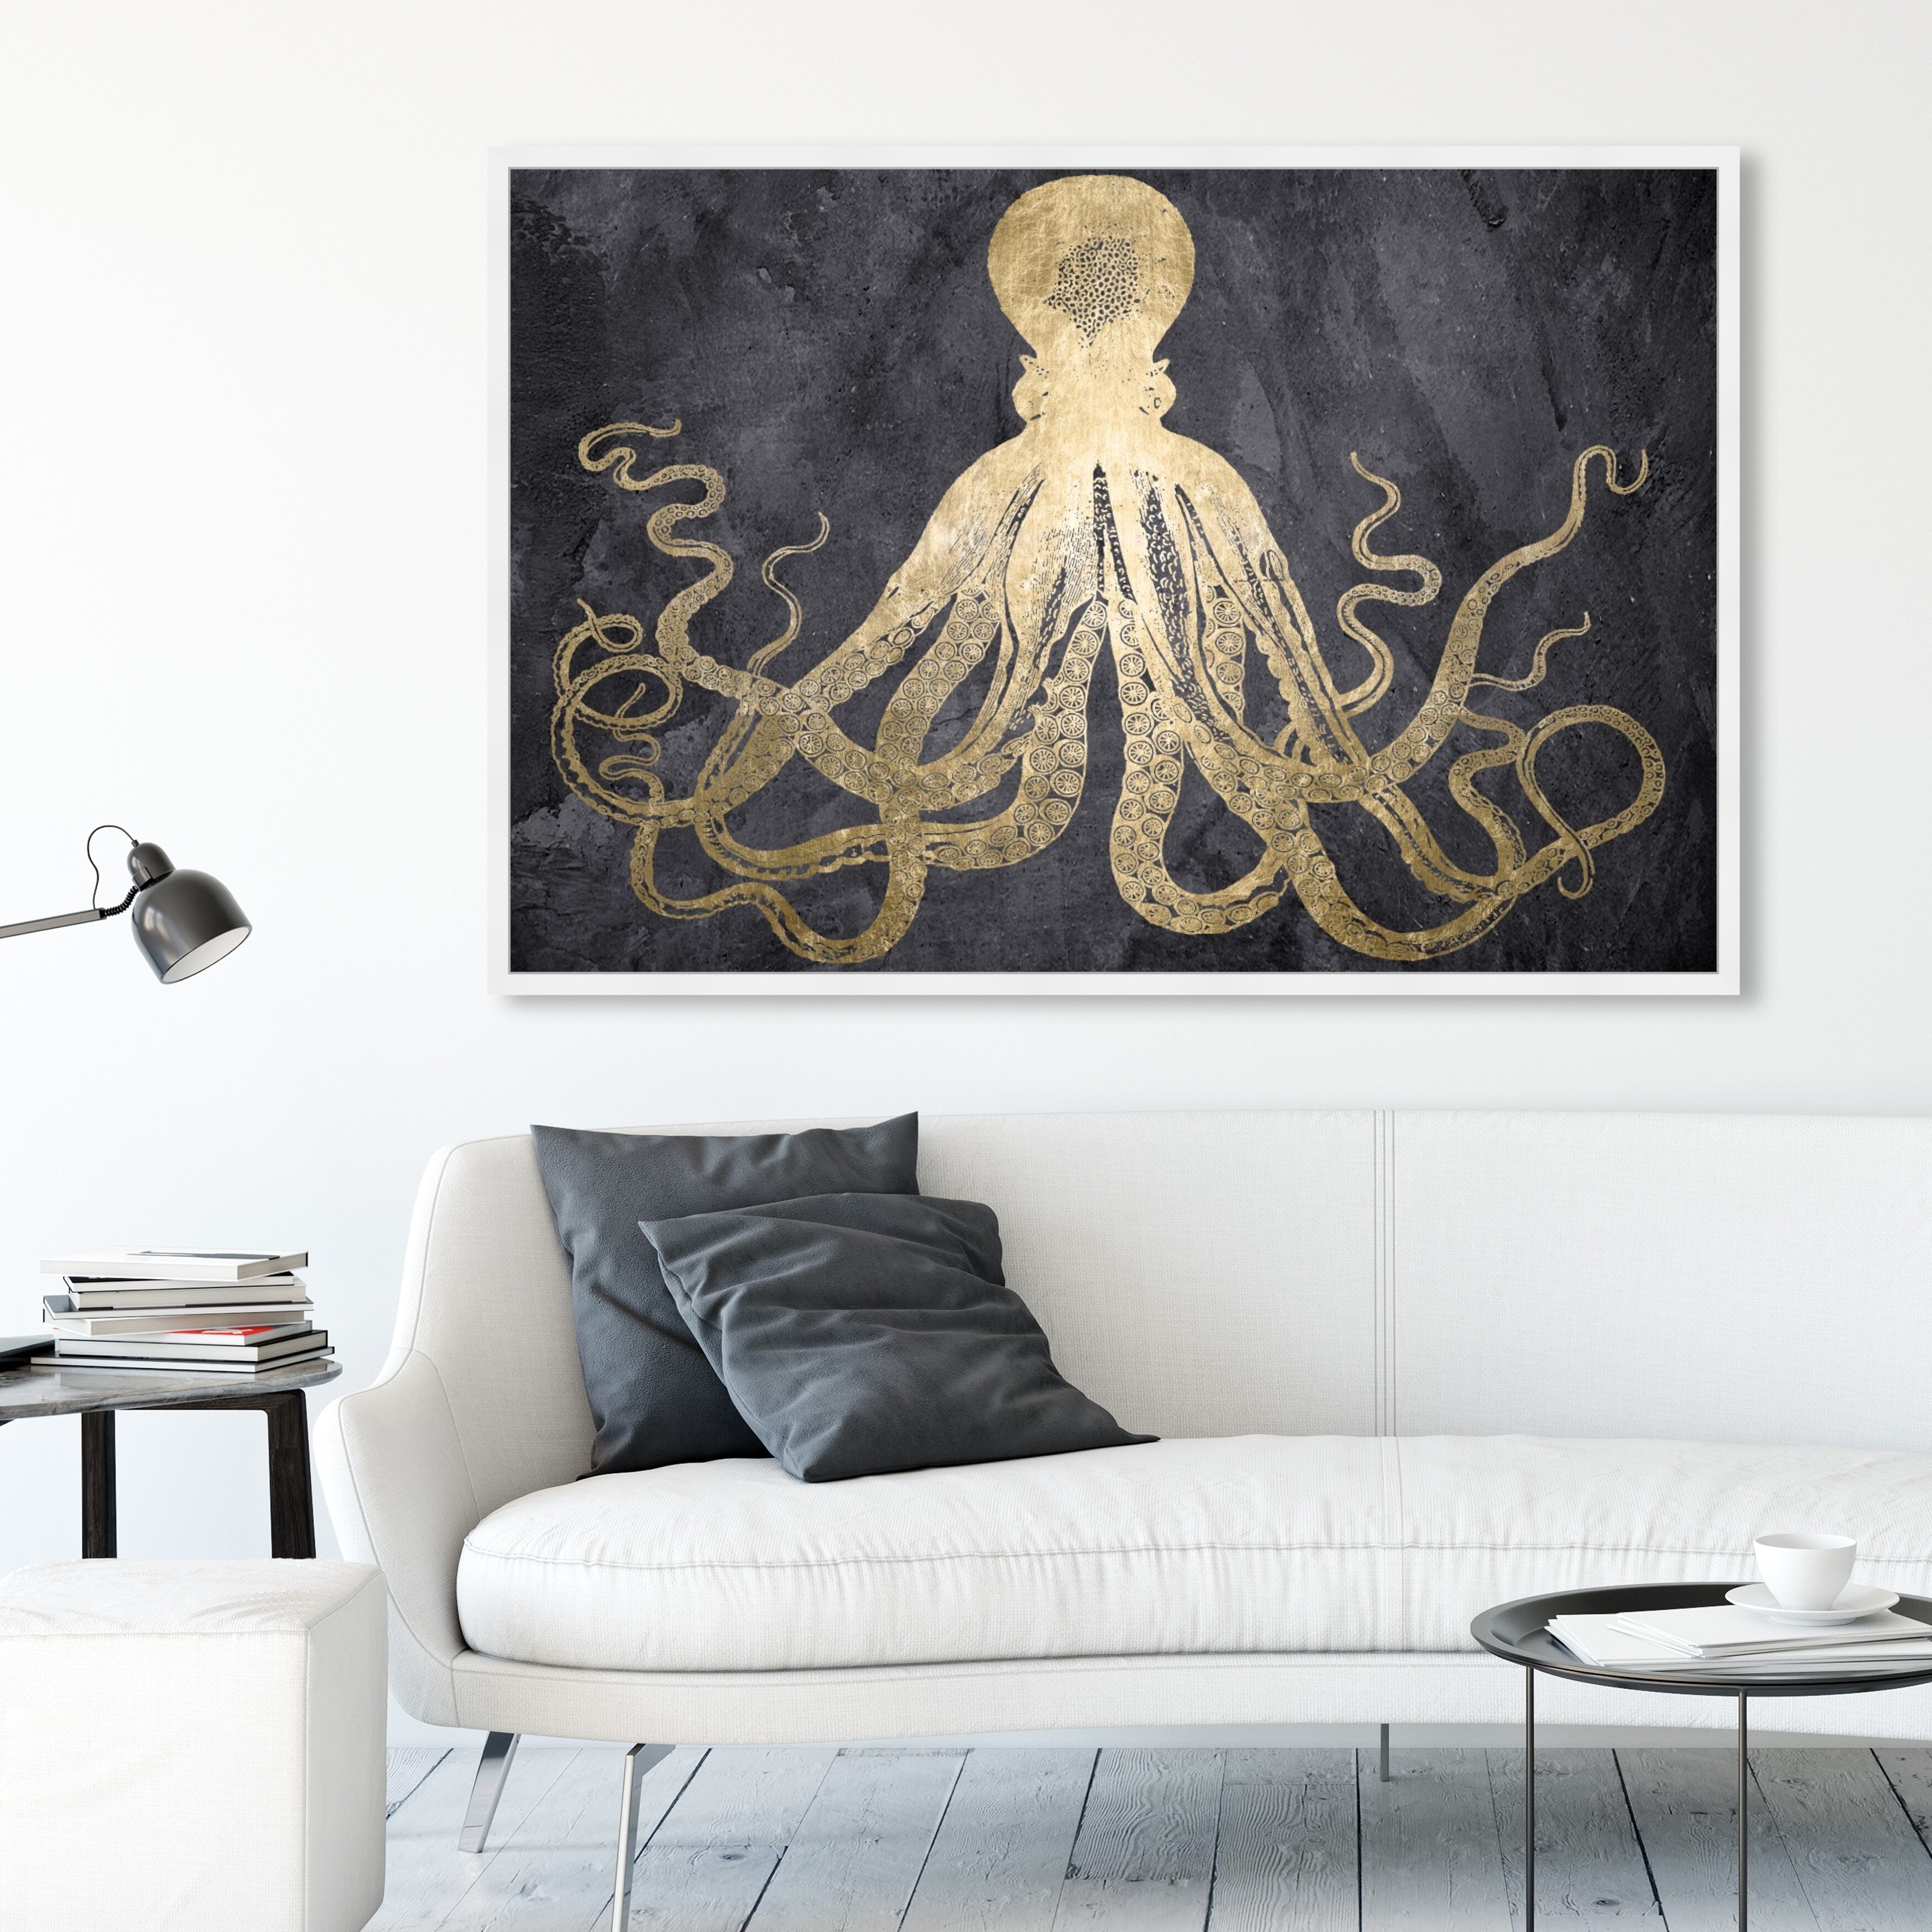 Awesome Octopus Wall Decor Figure Silver Leaf Finish 